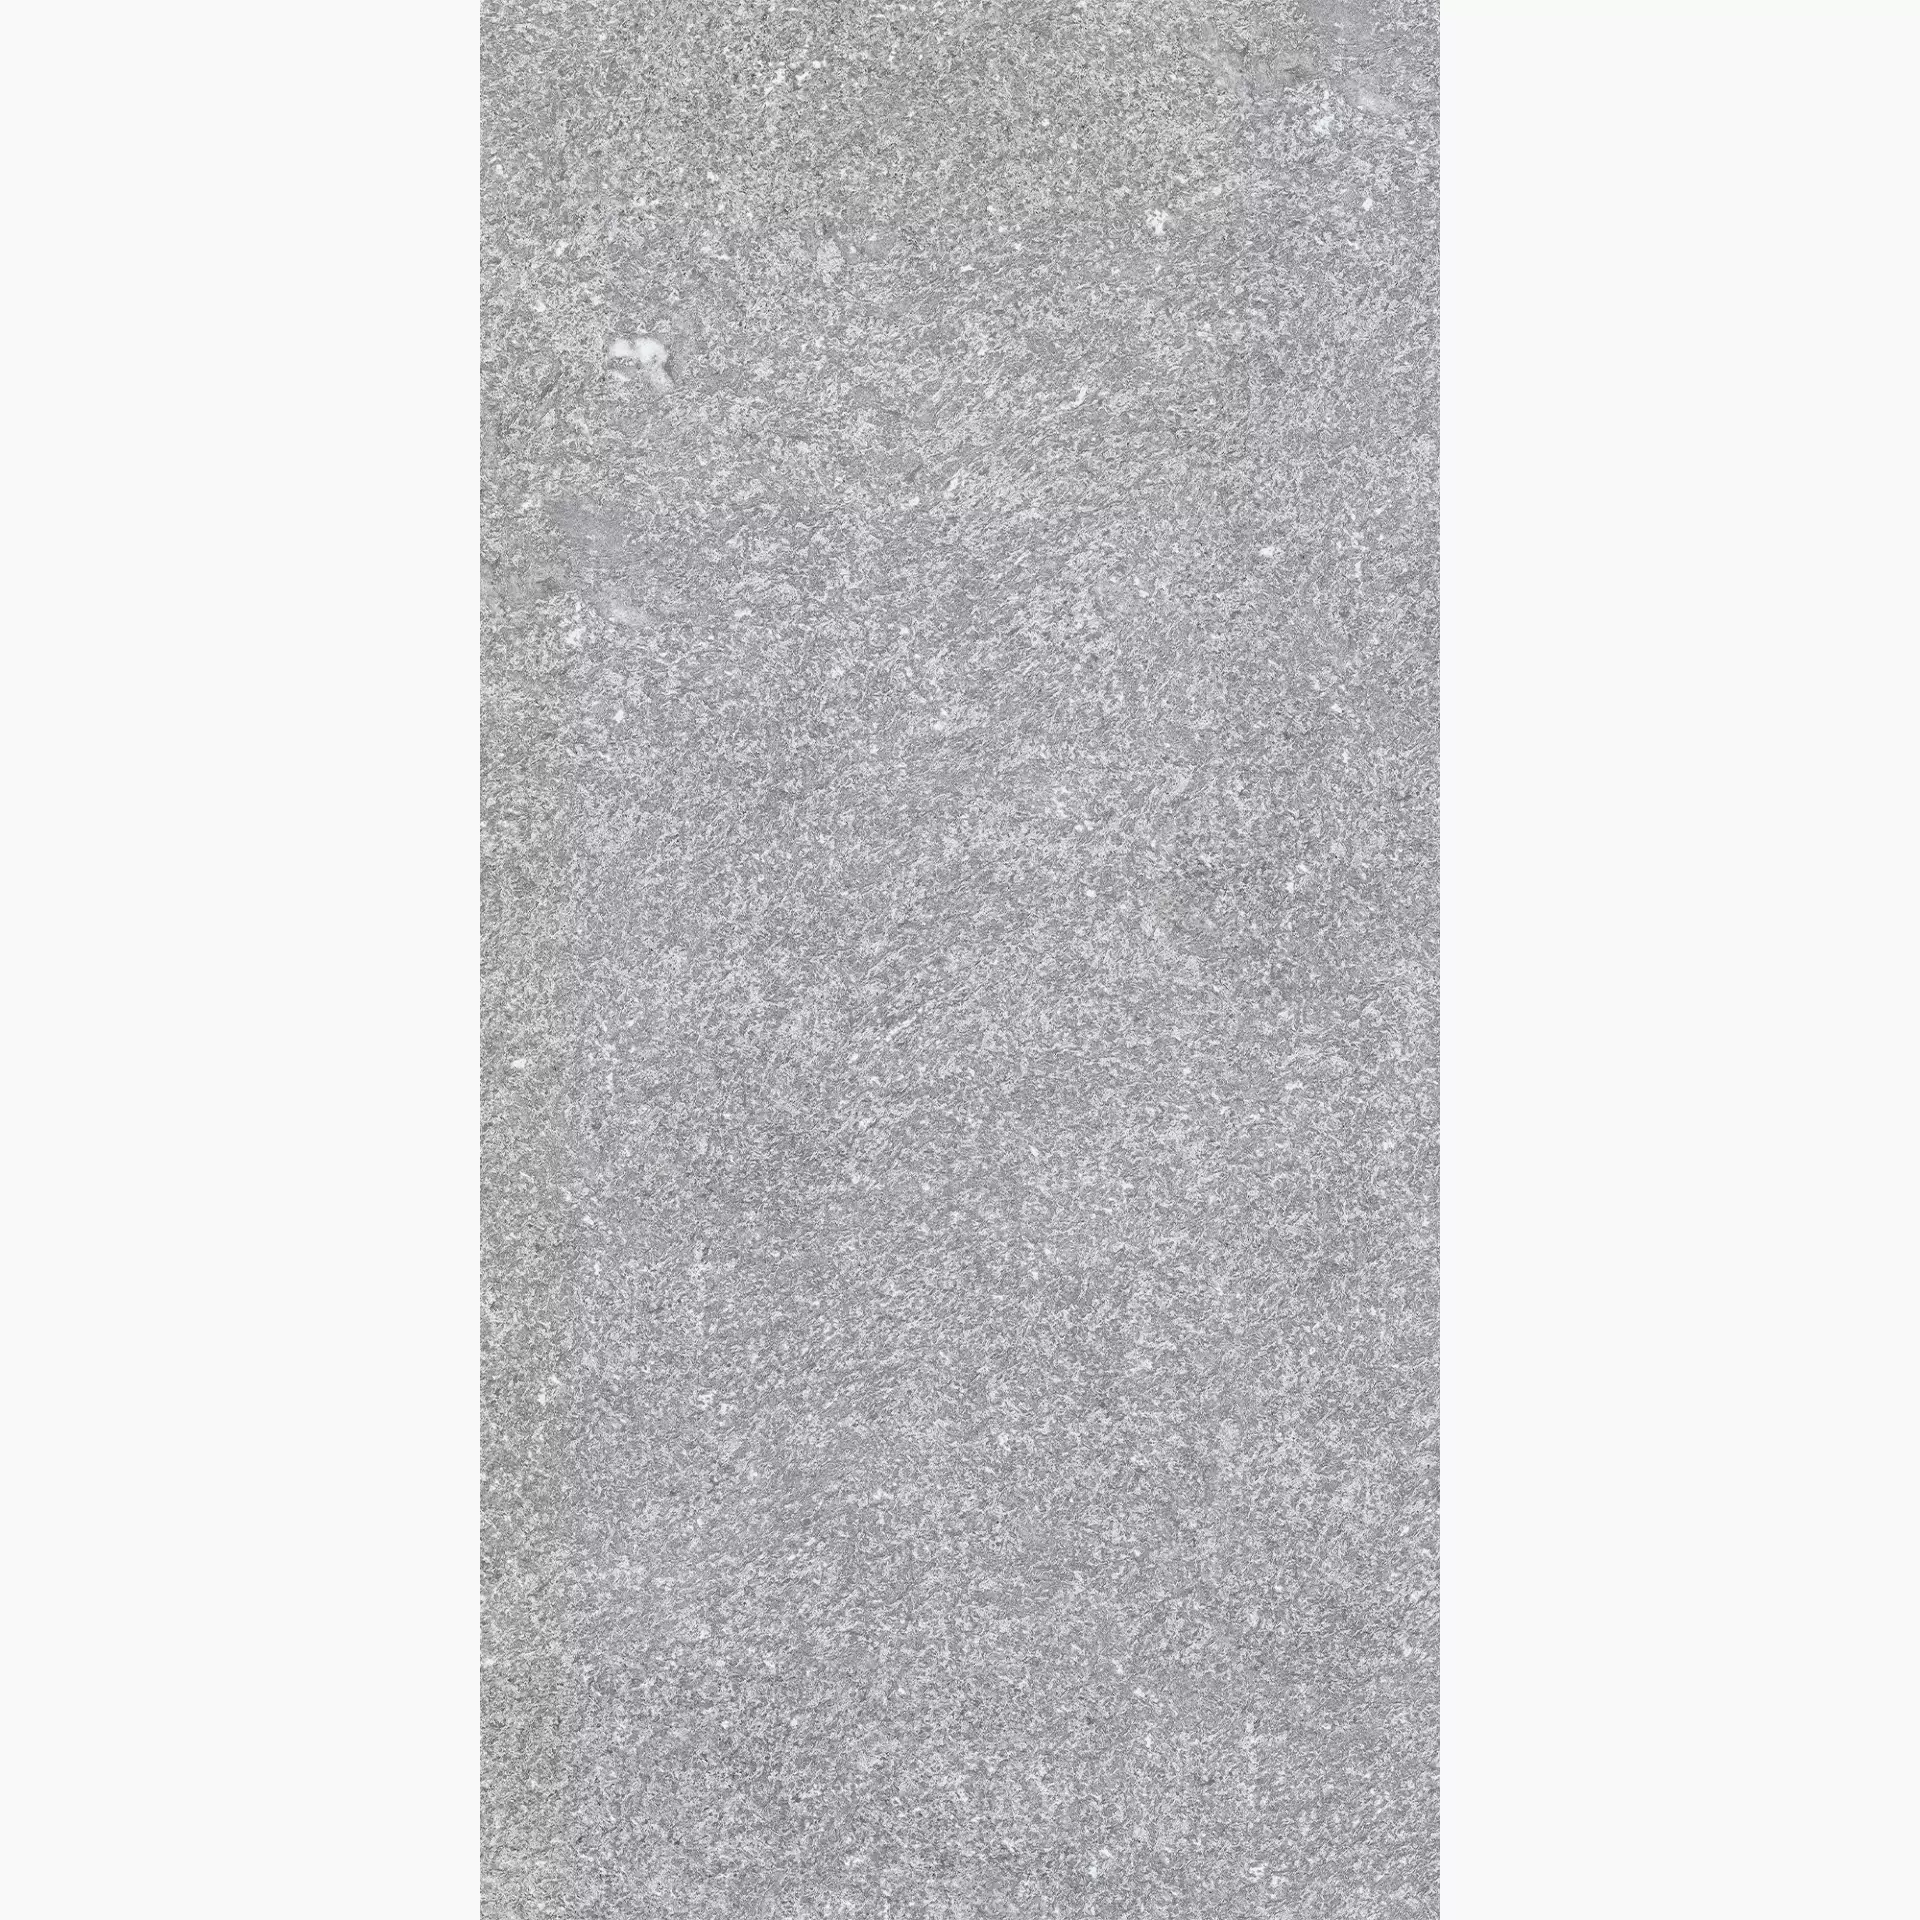 Caesar Shapes Of It Sestriere Grip AFPV 60x120cm rectified 9mm